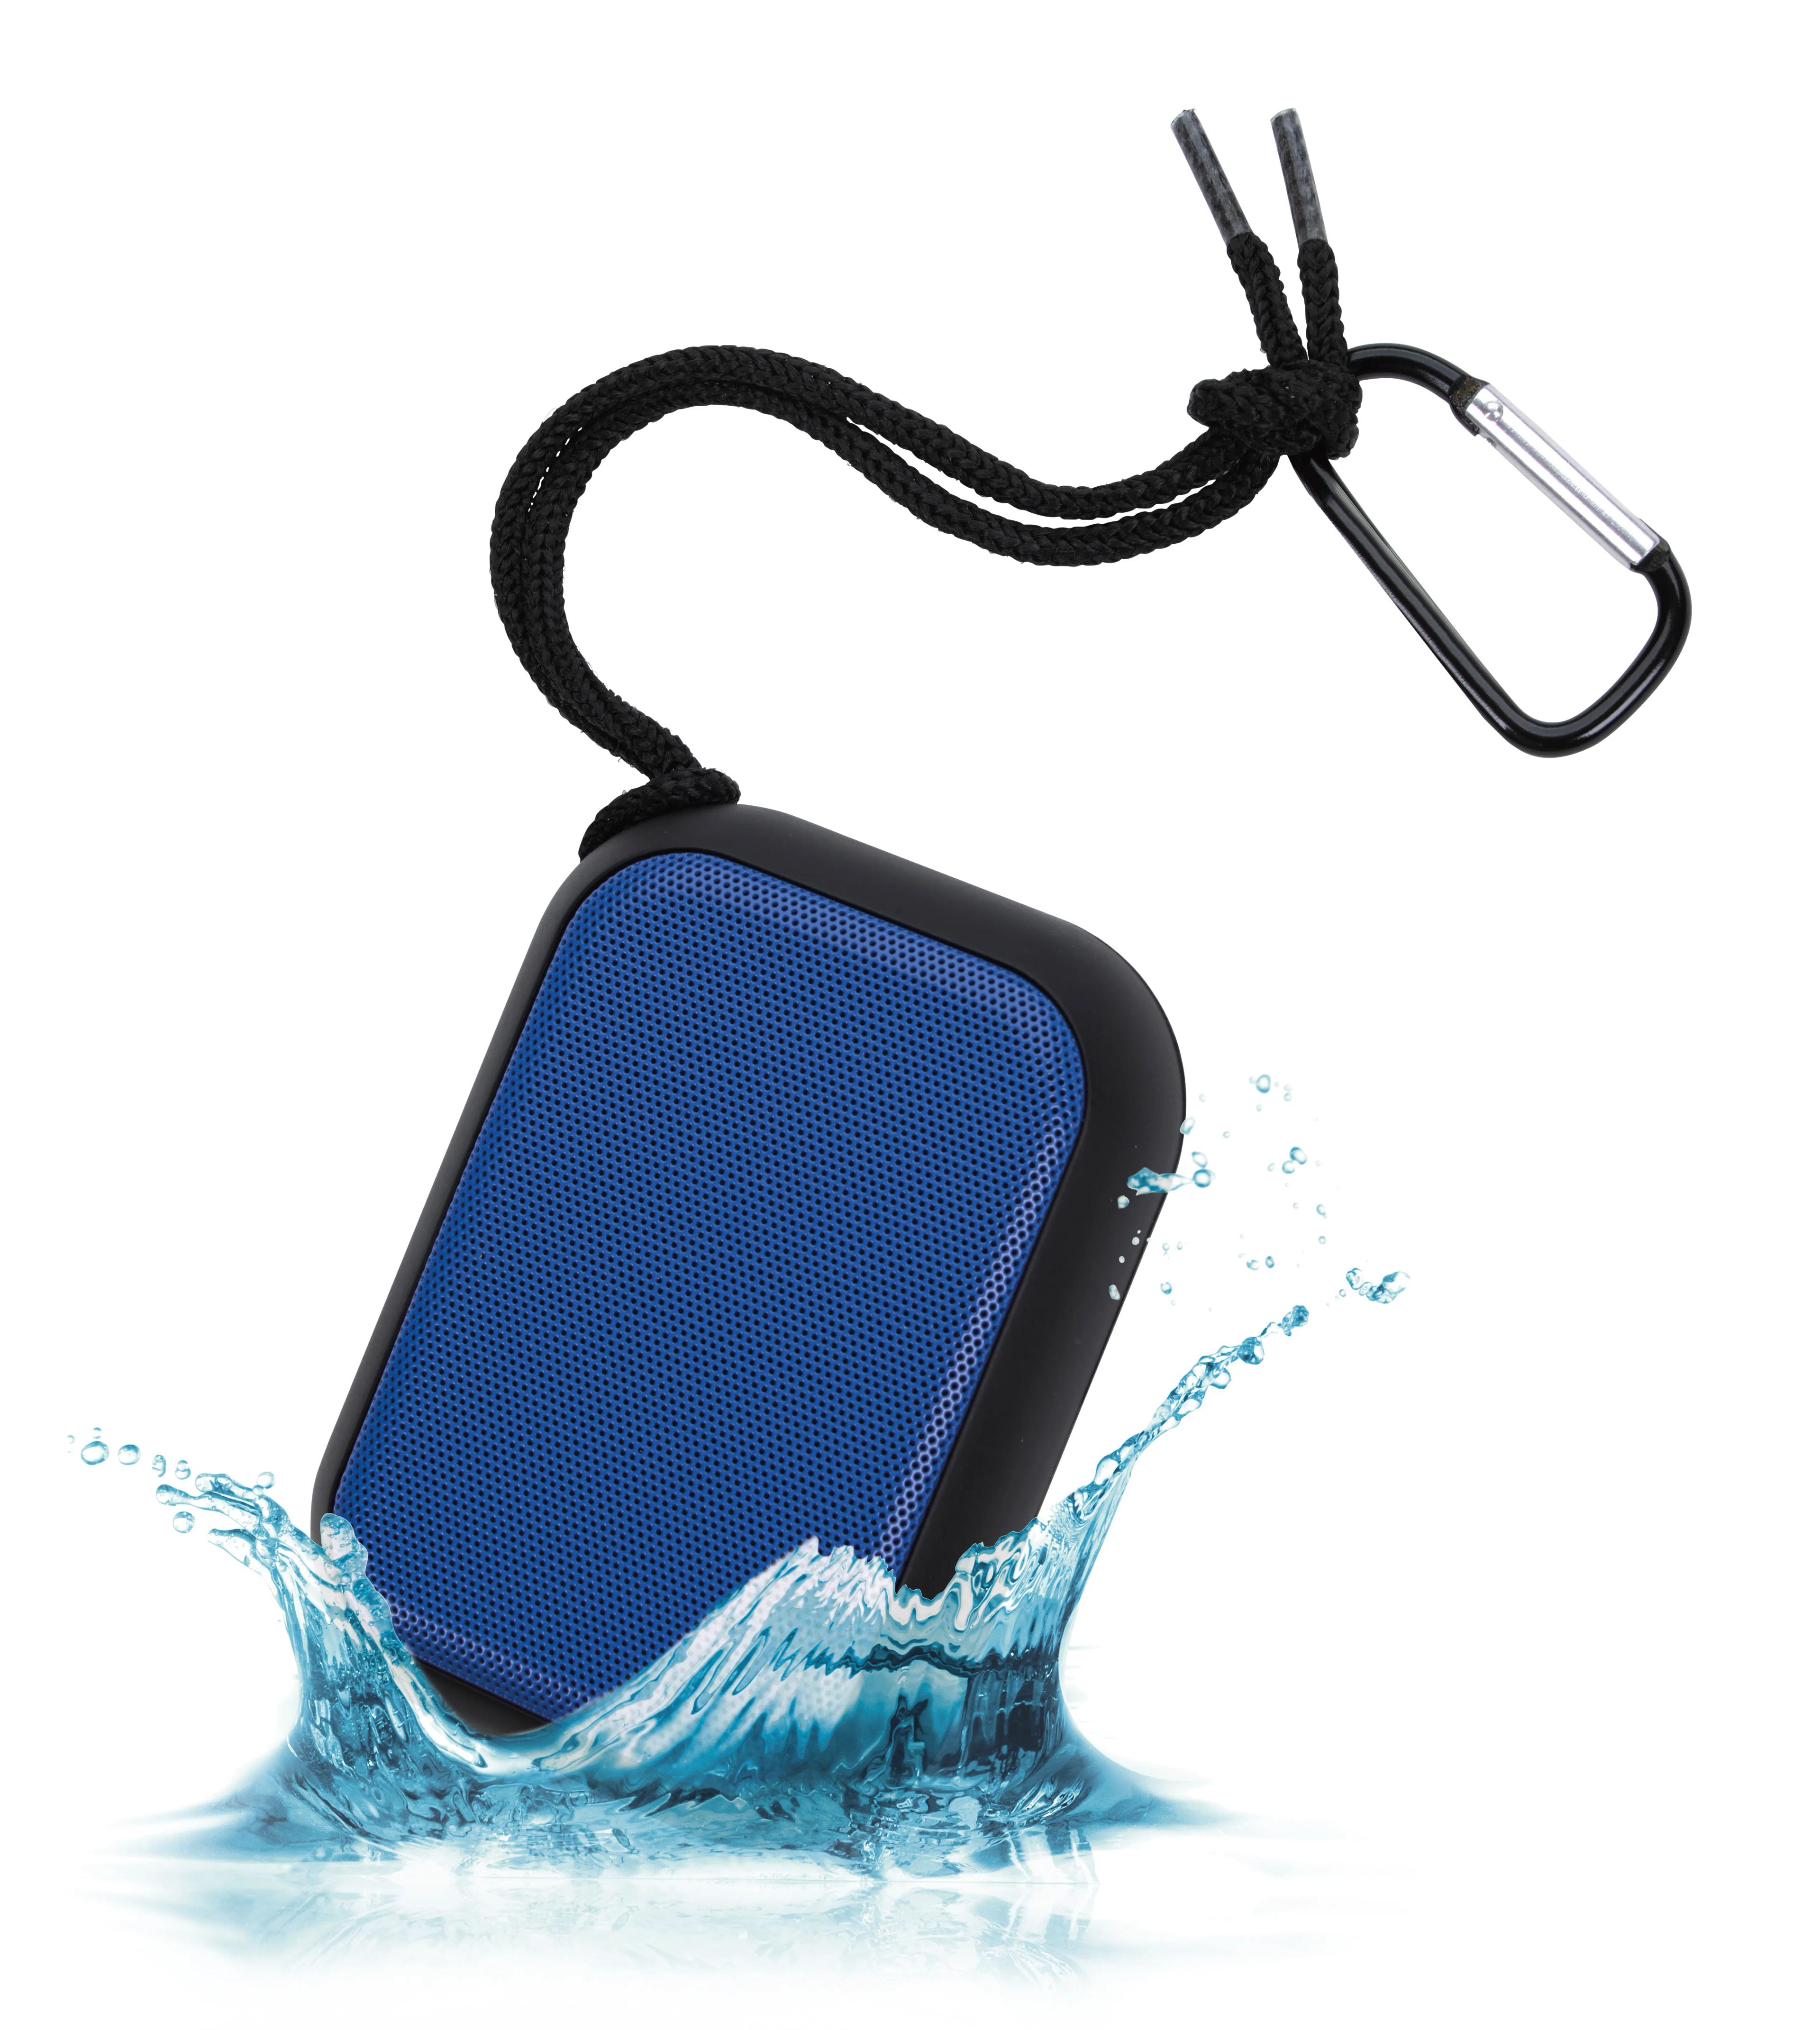 Travel-Size Water-resistant Bluetooth® Speaker 16 of 22